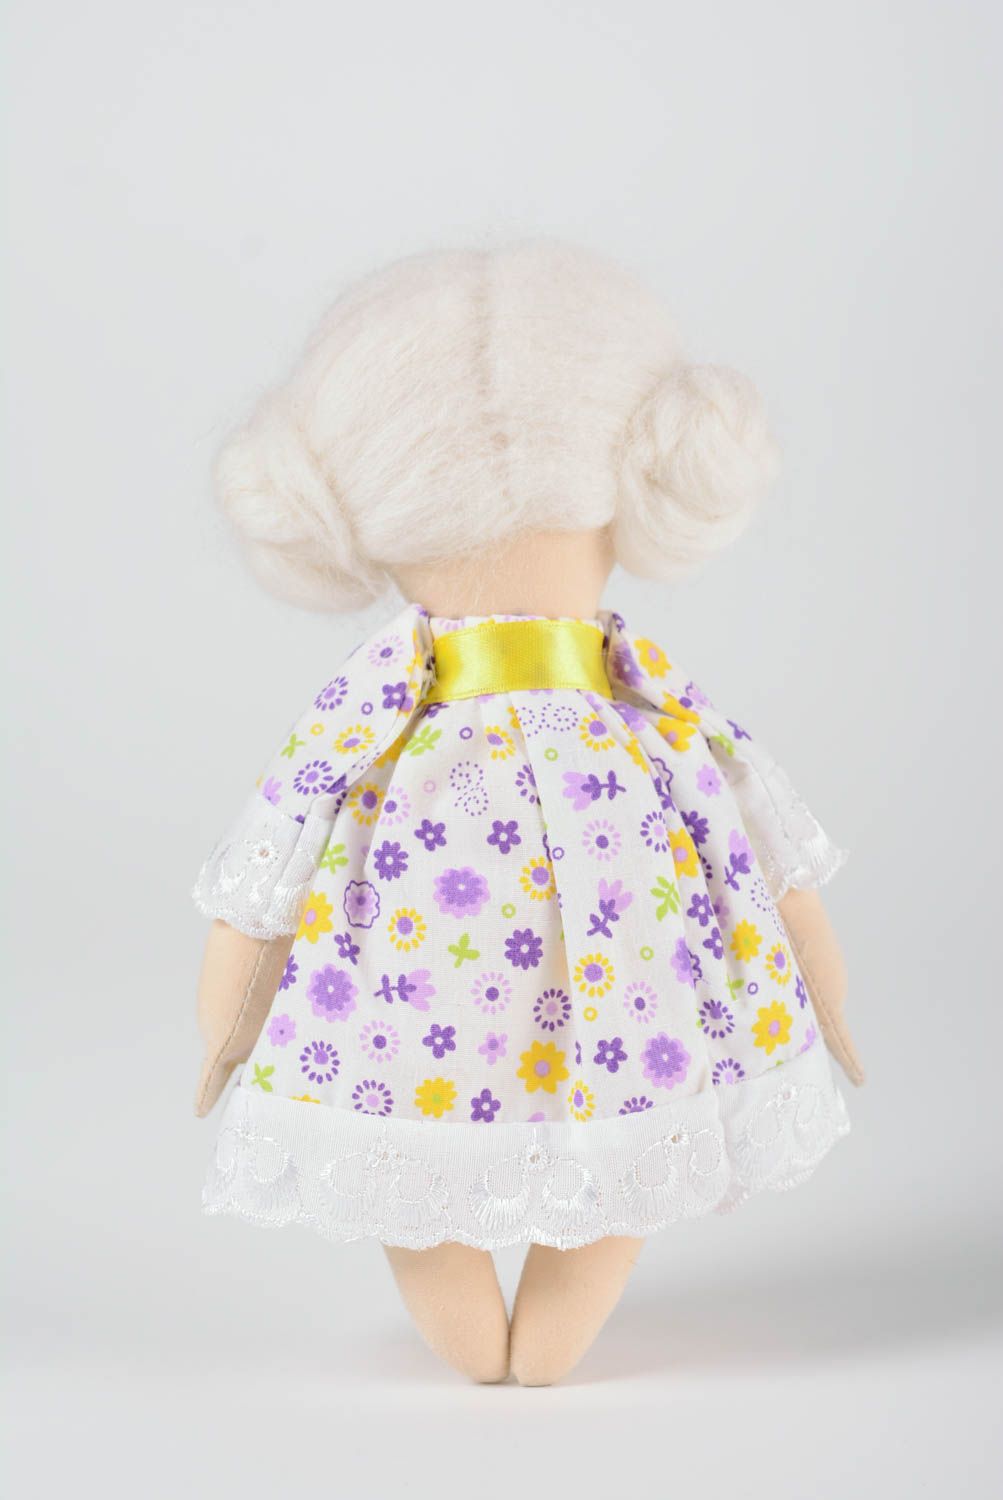 Handmade cotton soft doll with white hair in floral dress painted with acrylics photo 4